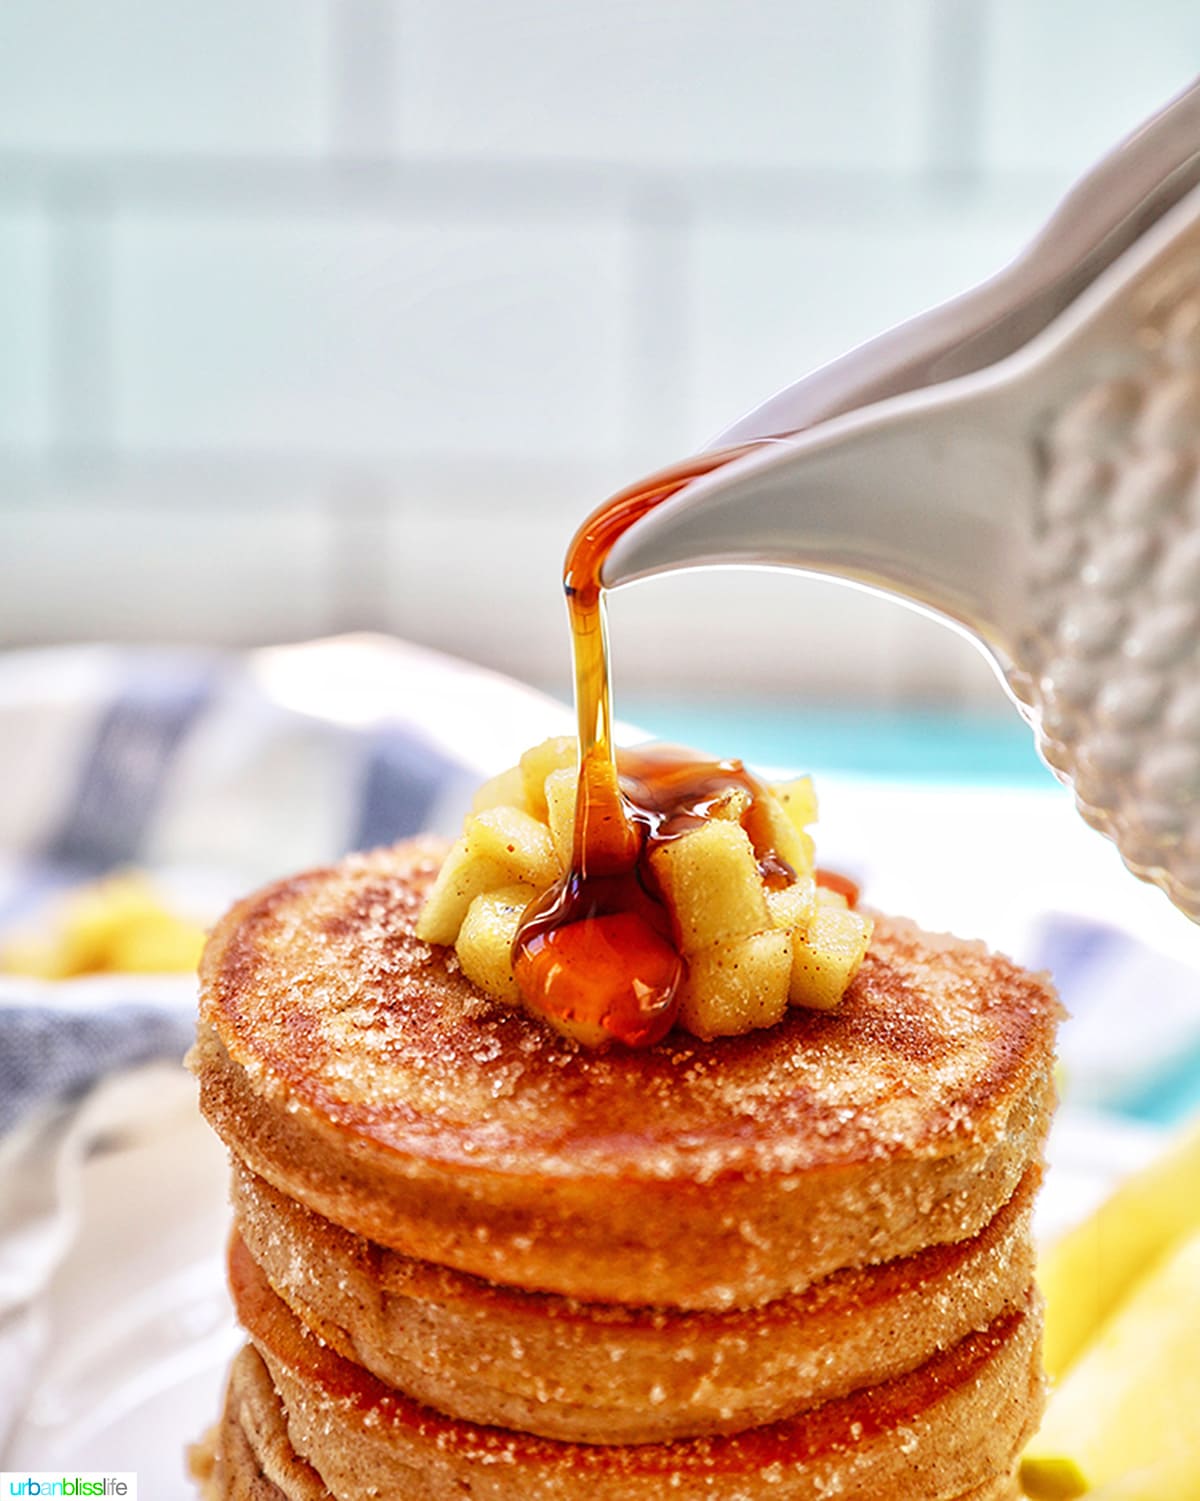 pouring maple syrup over a stack of pancakes with chopped apples on top.